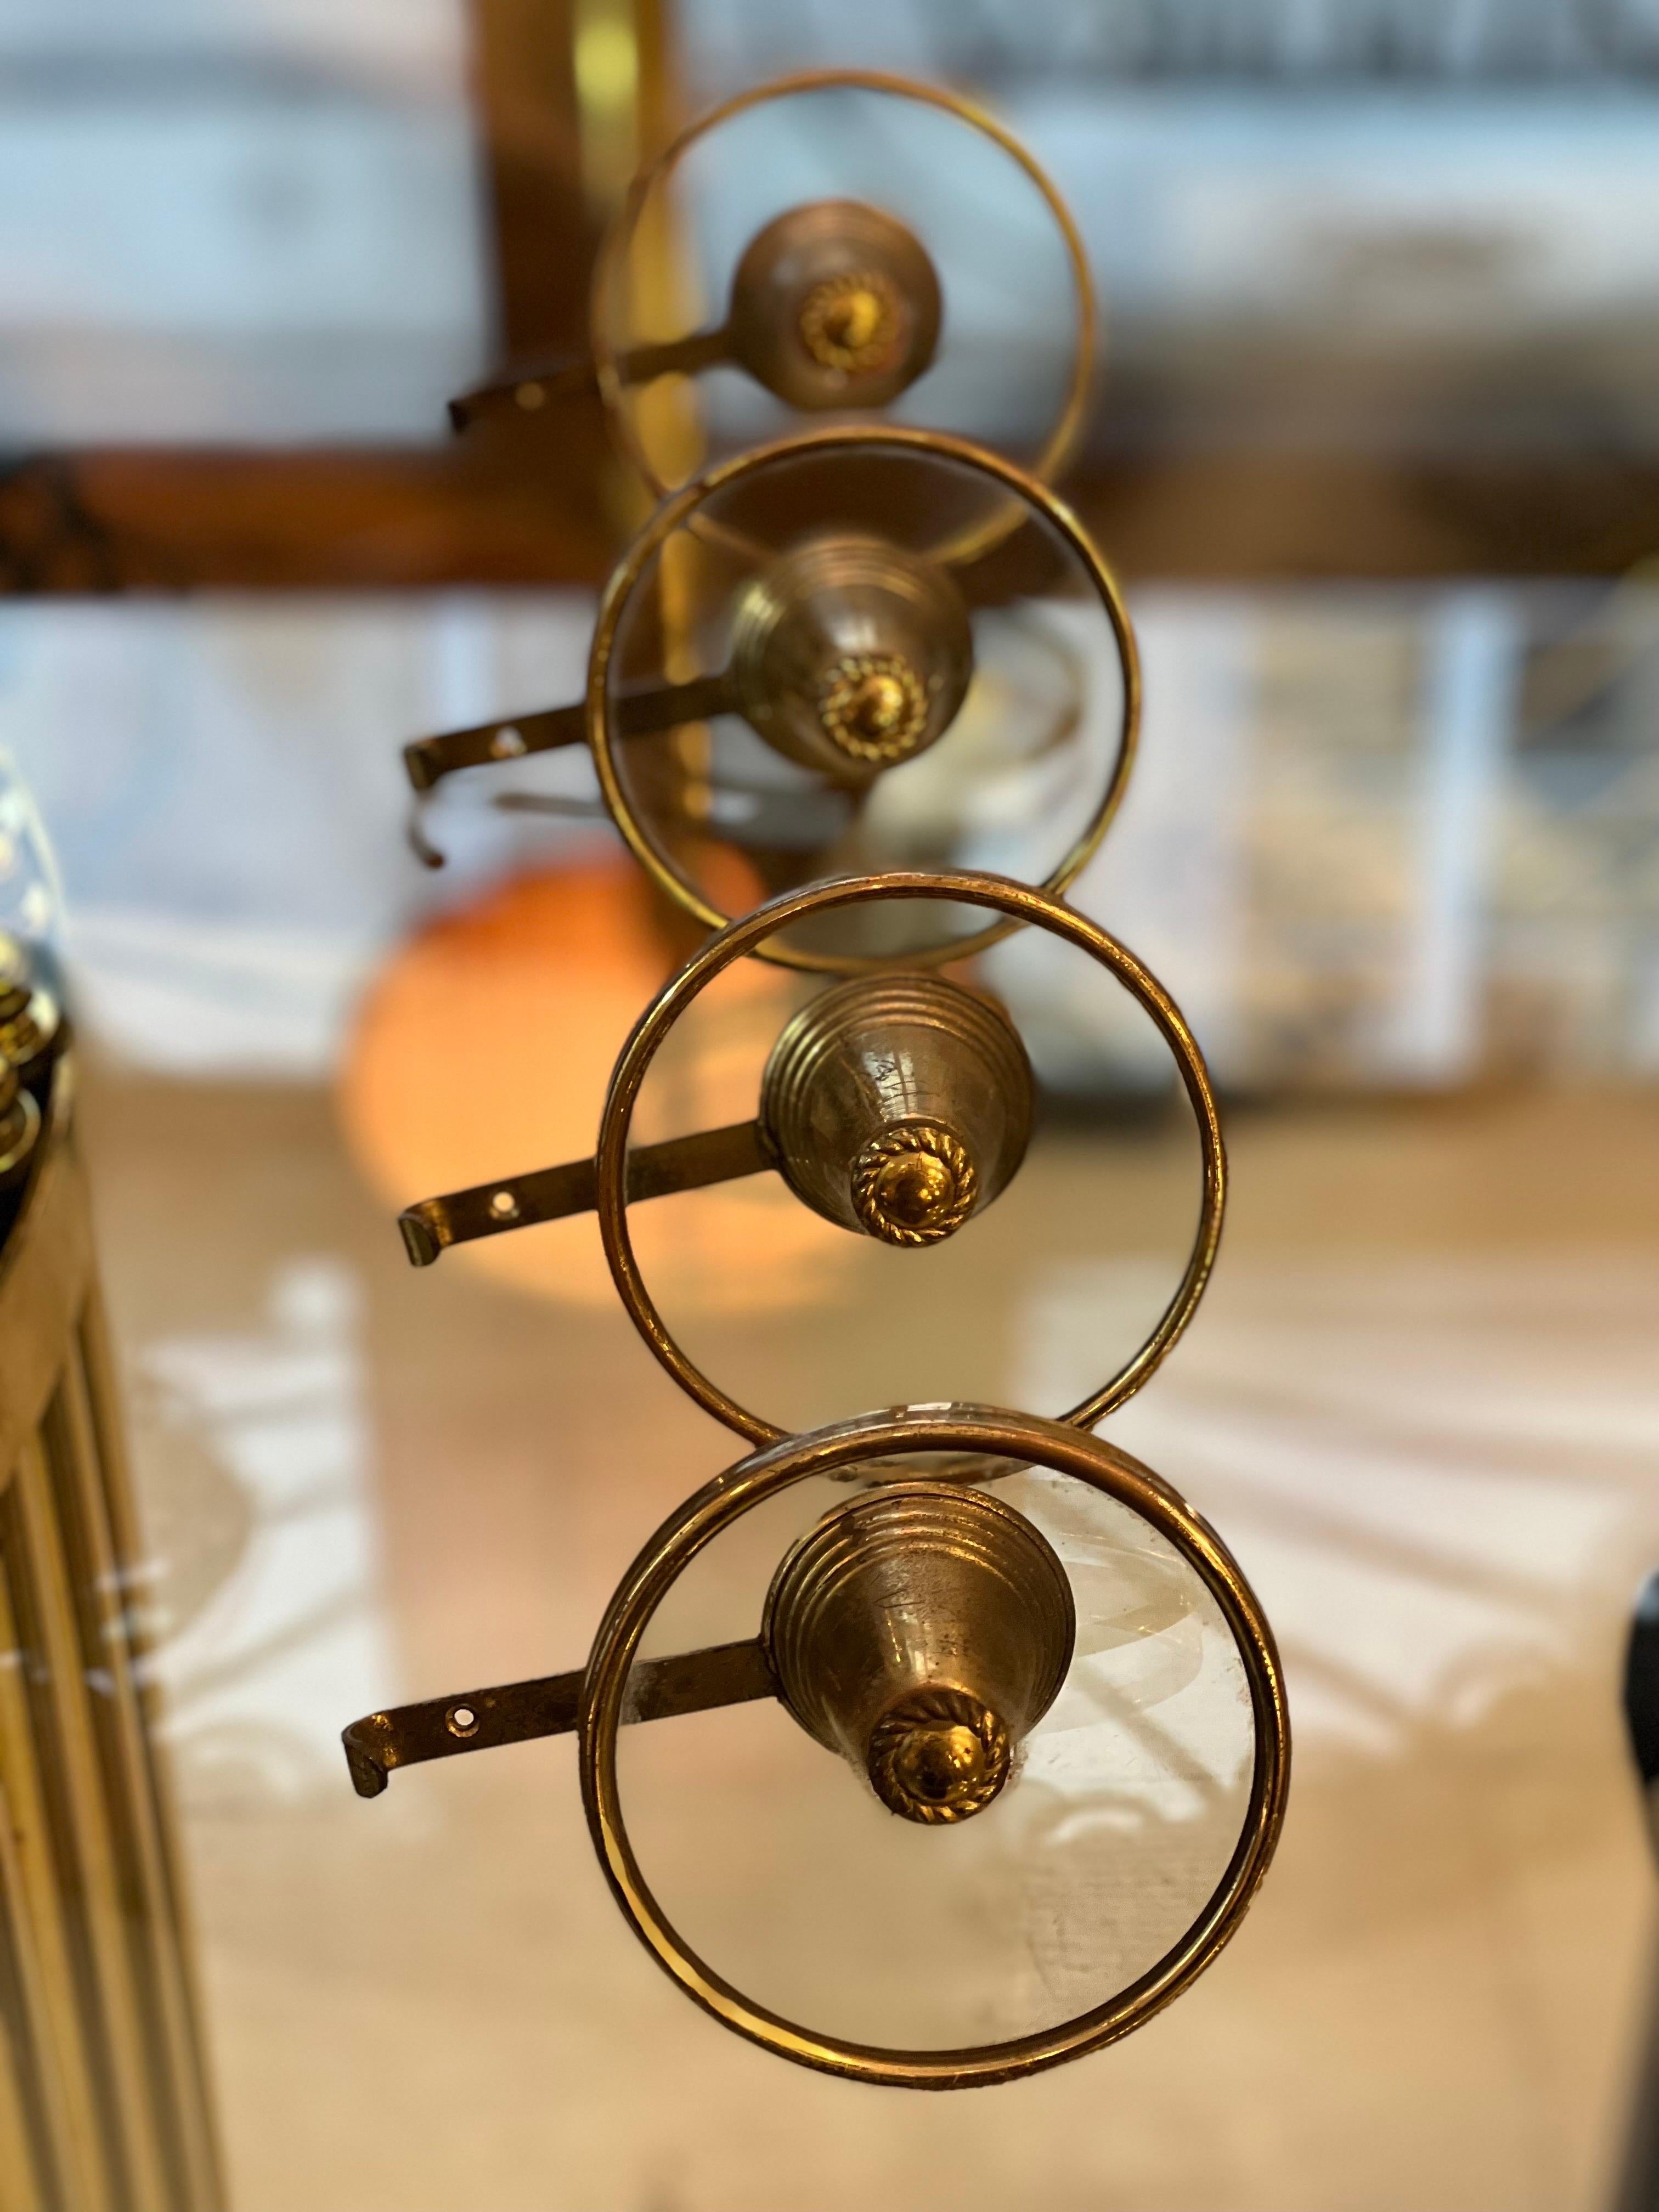 Set of Four Italian Vintage Brass and Glass Round Coat Hangers.